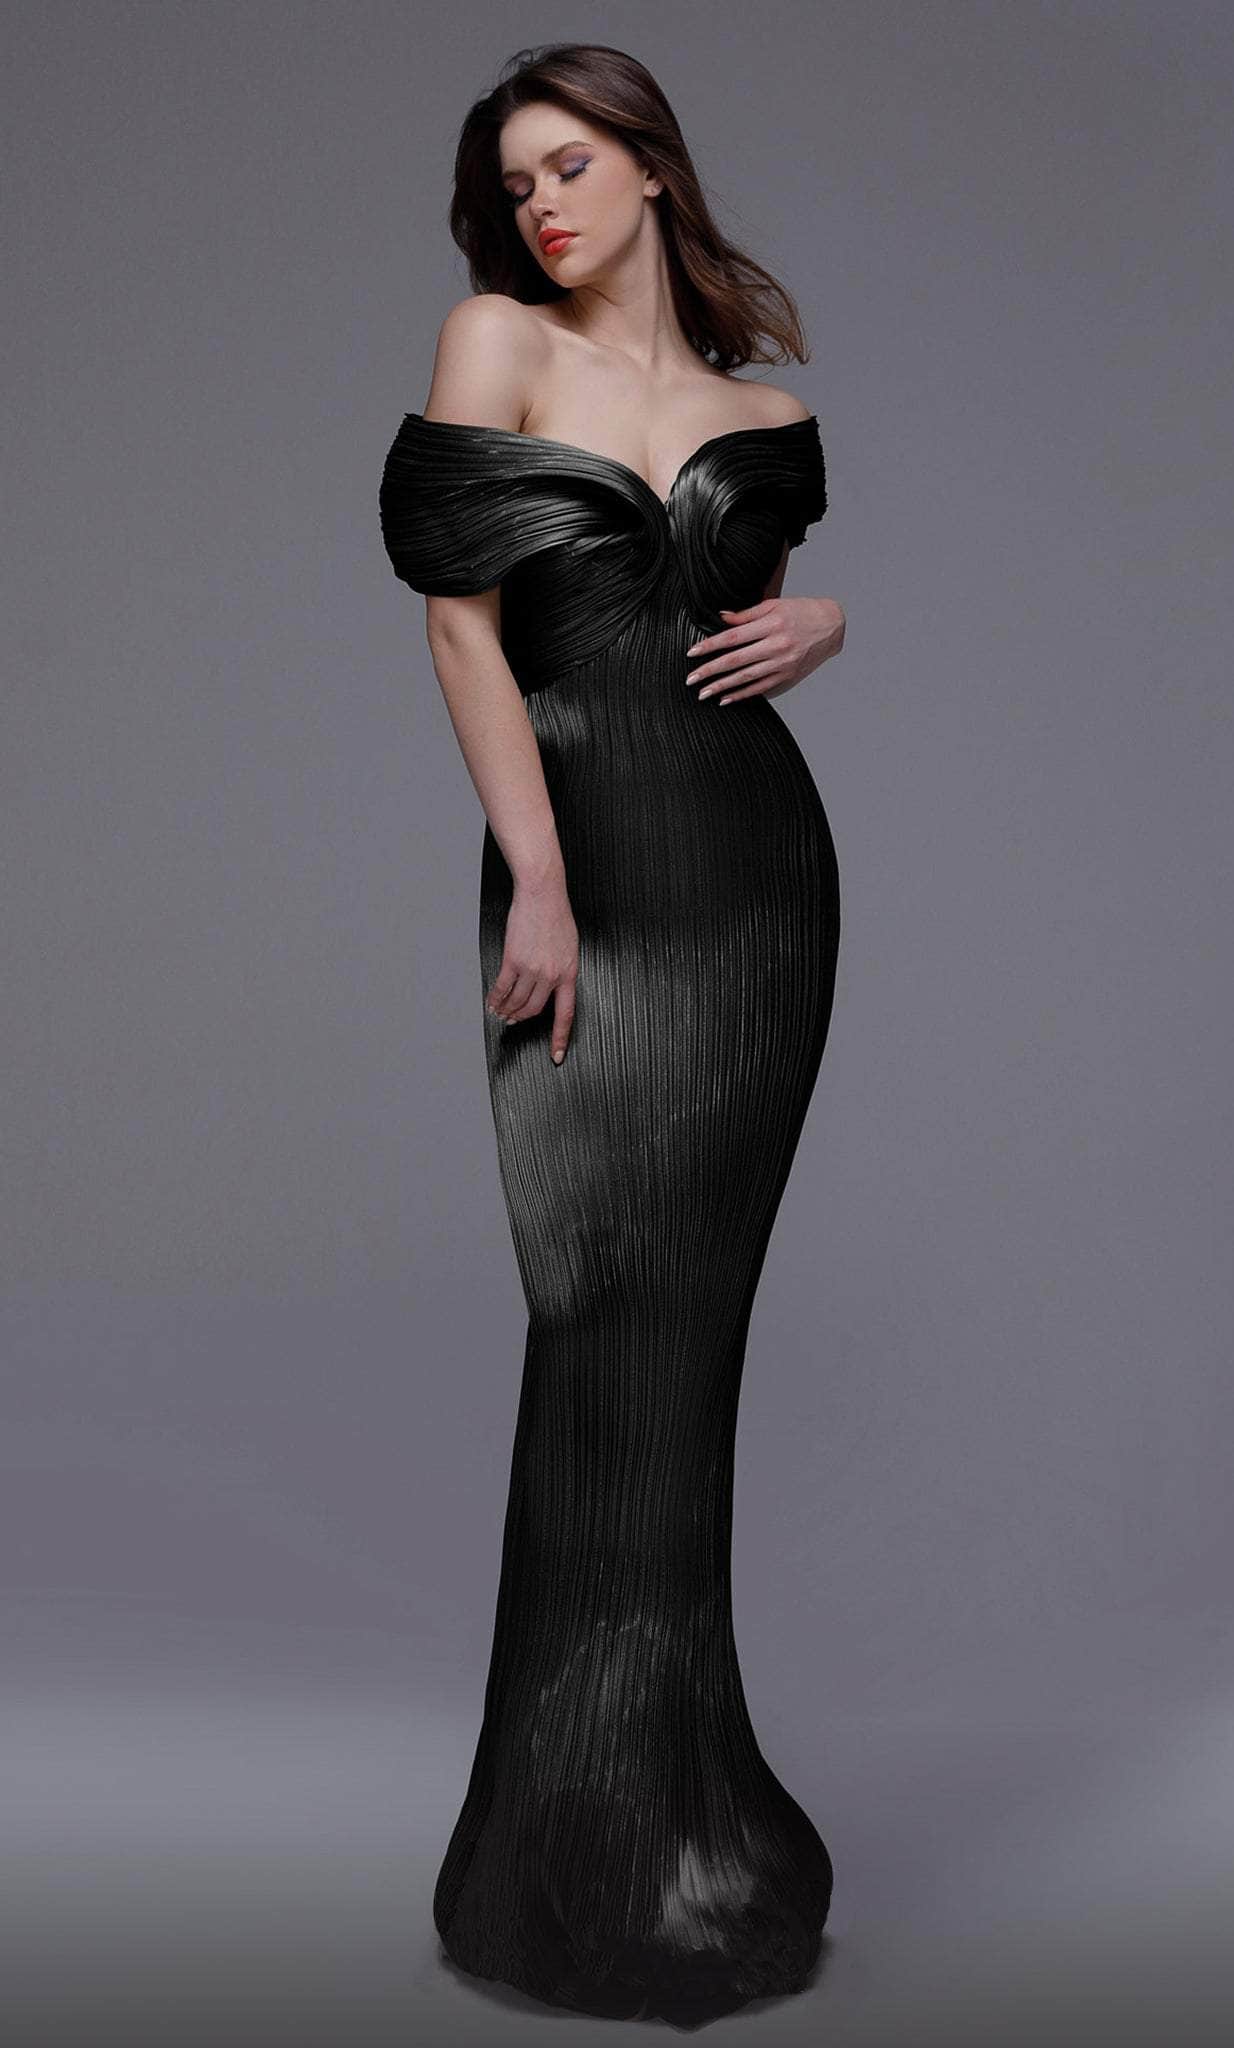 MNM COUTURE 2729 - Metallic Pleated Evening Gown Evening Dresses 4 / Black